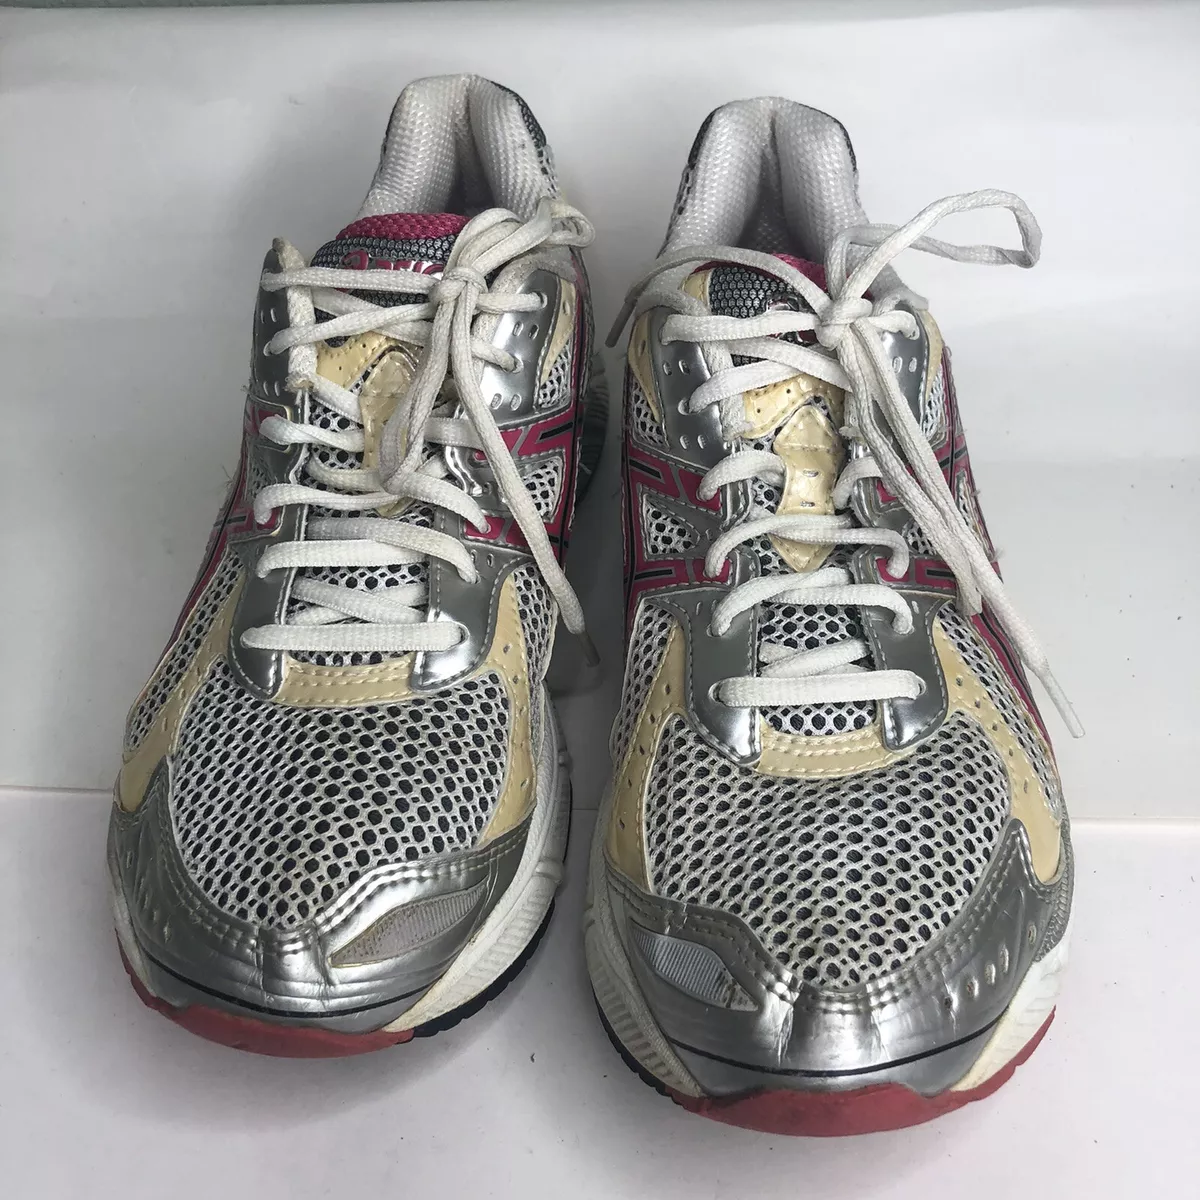 Asics Gel 1160 Running Shoes Sneakers Size 8.5 Great Condition | eBay